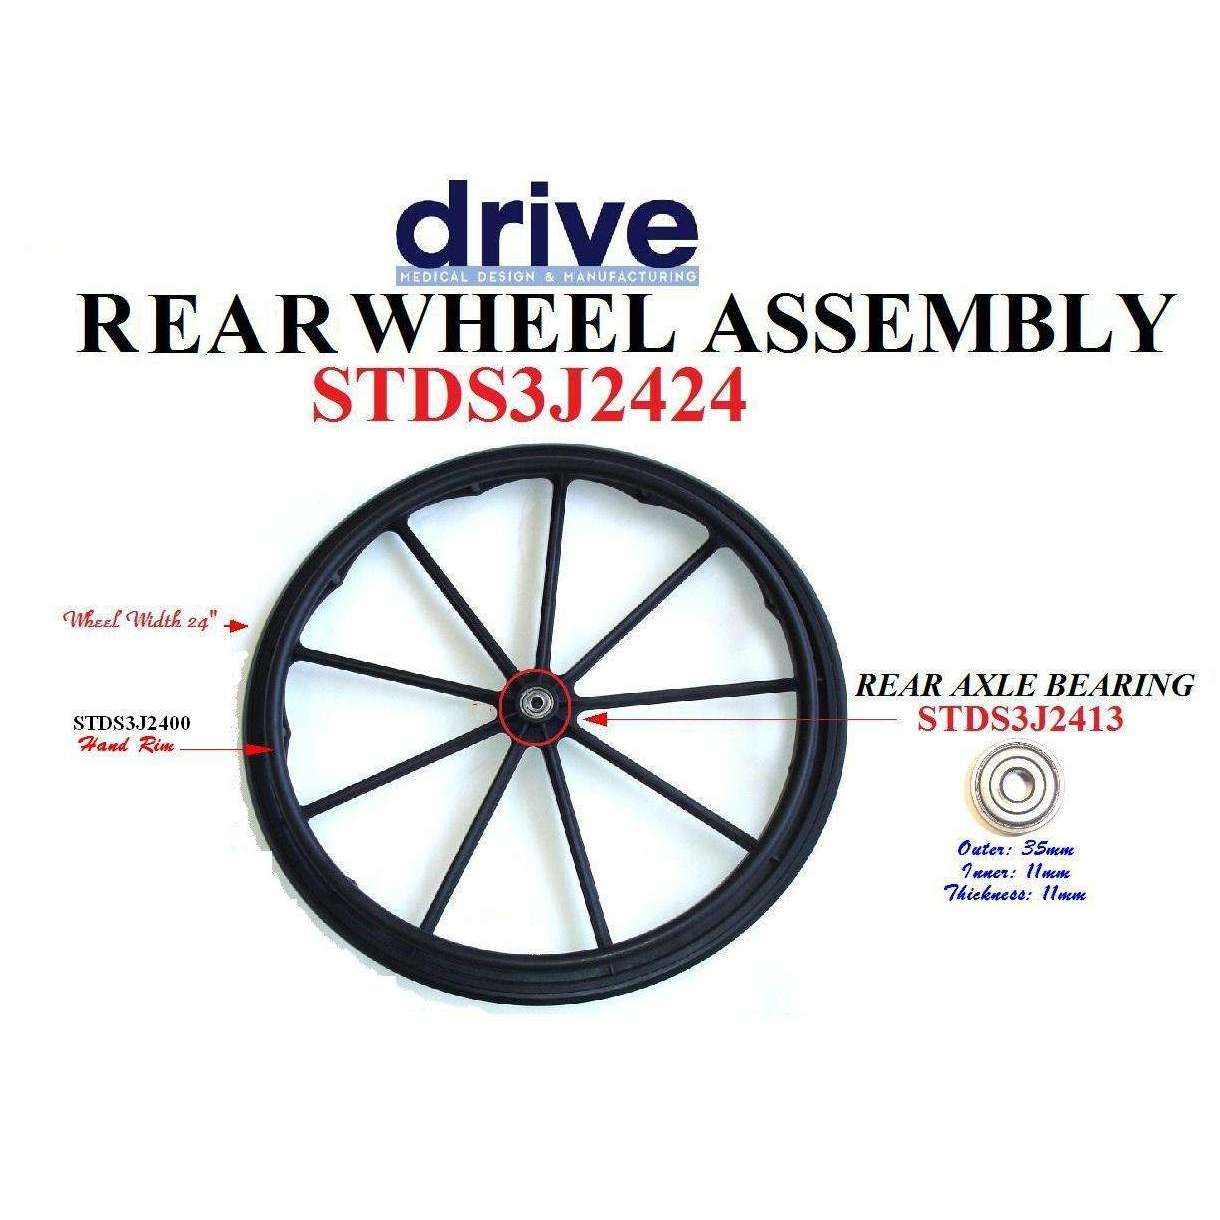 Drive Silver Sport 2 replacement parts list